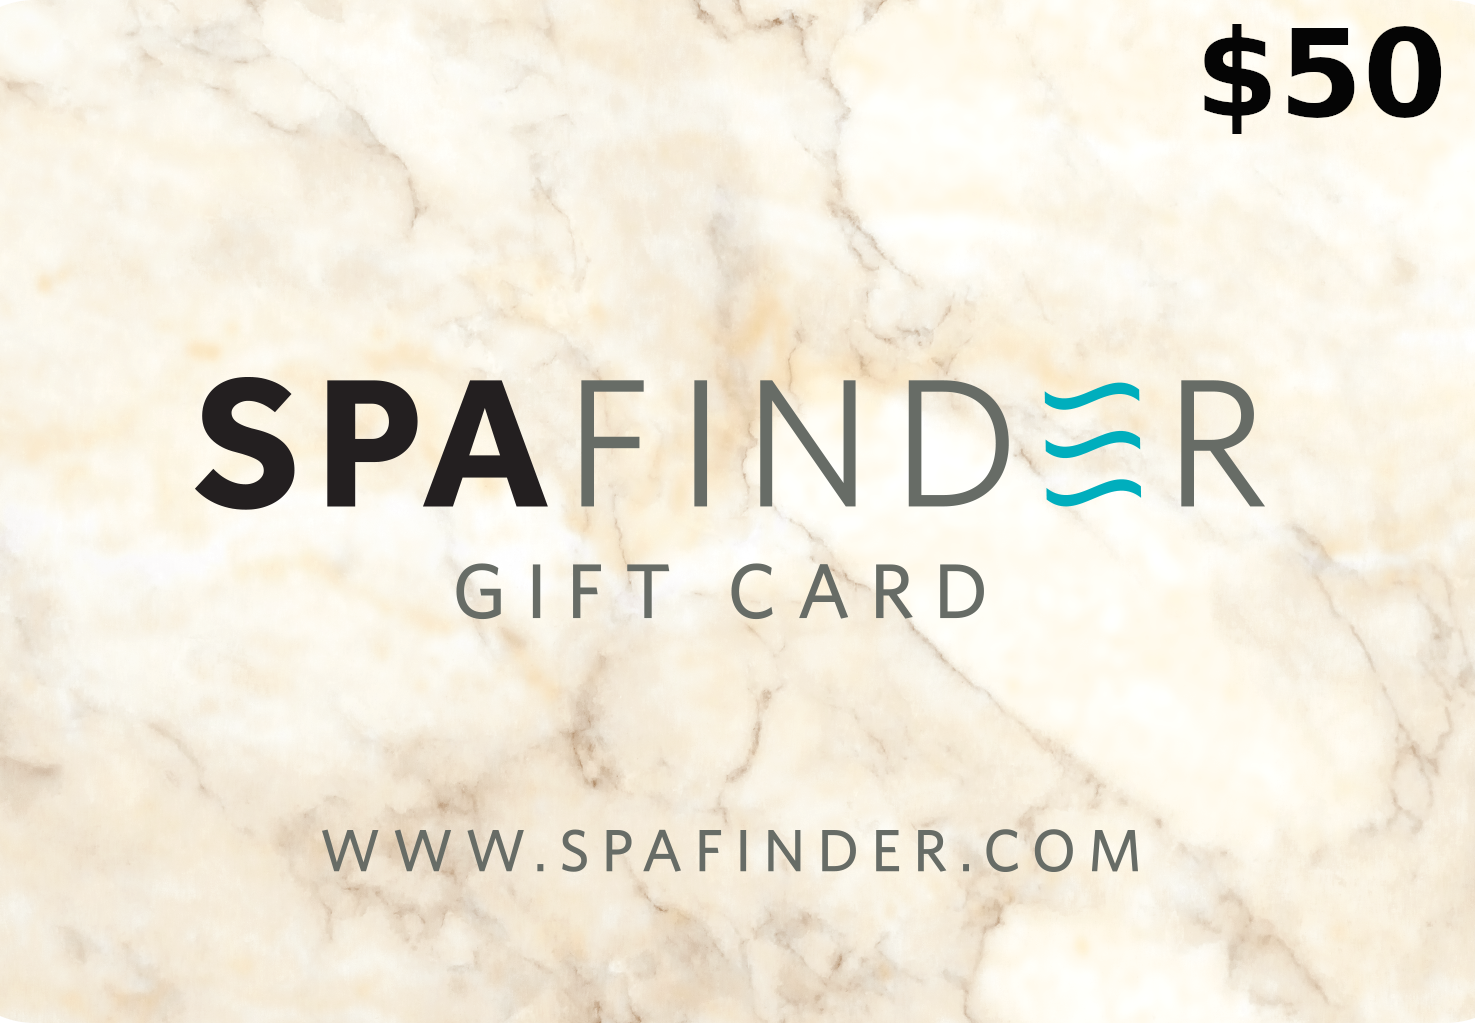 Spafinder Wellness 365 $50 Gift Card US, 33.9 usd